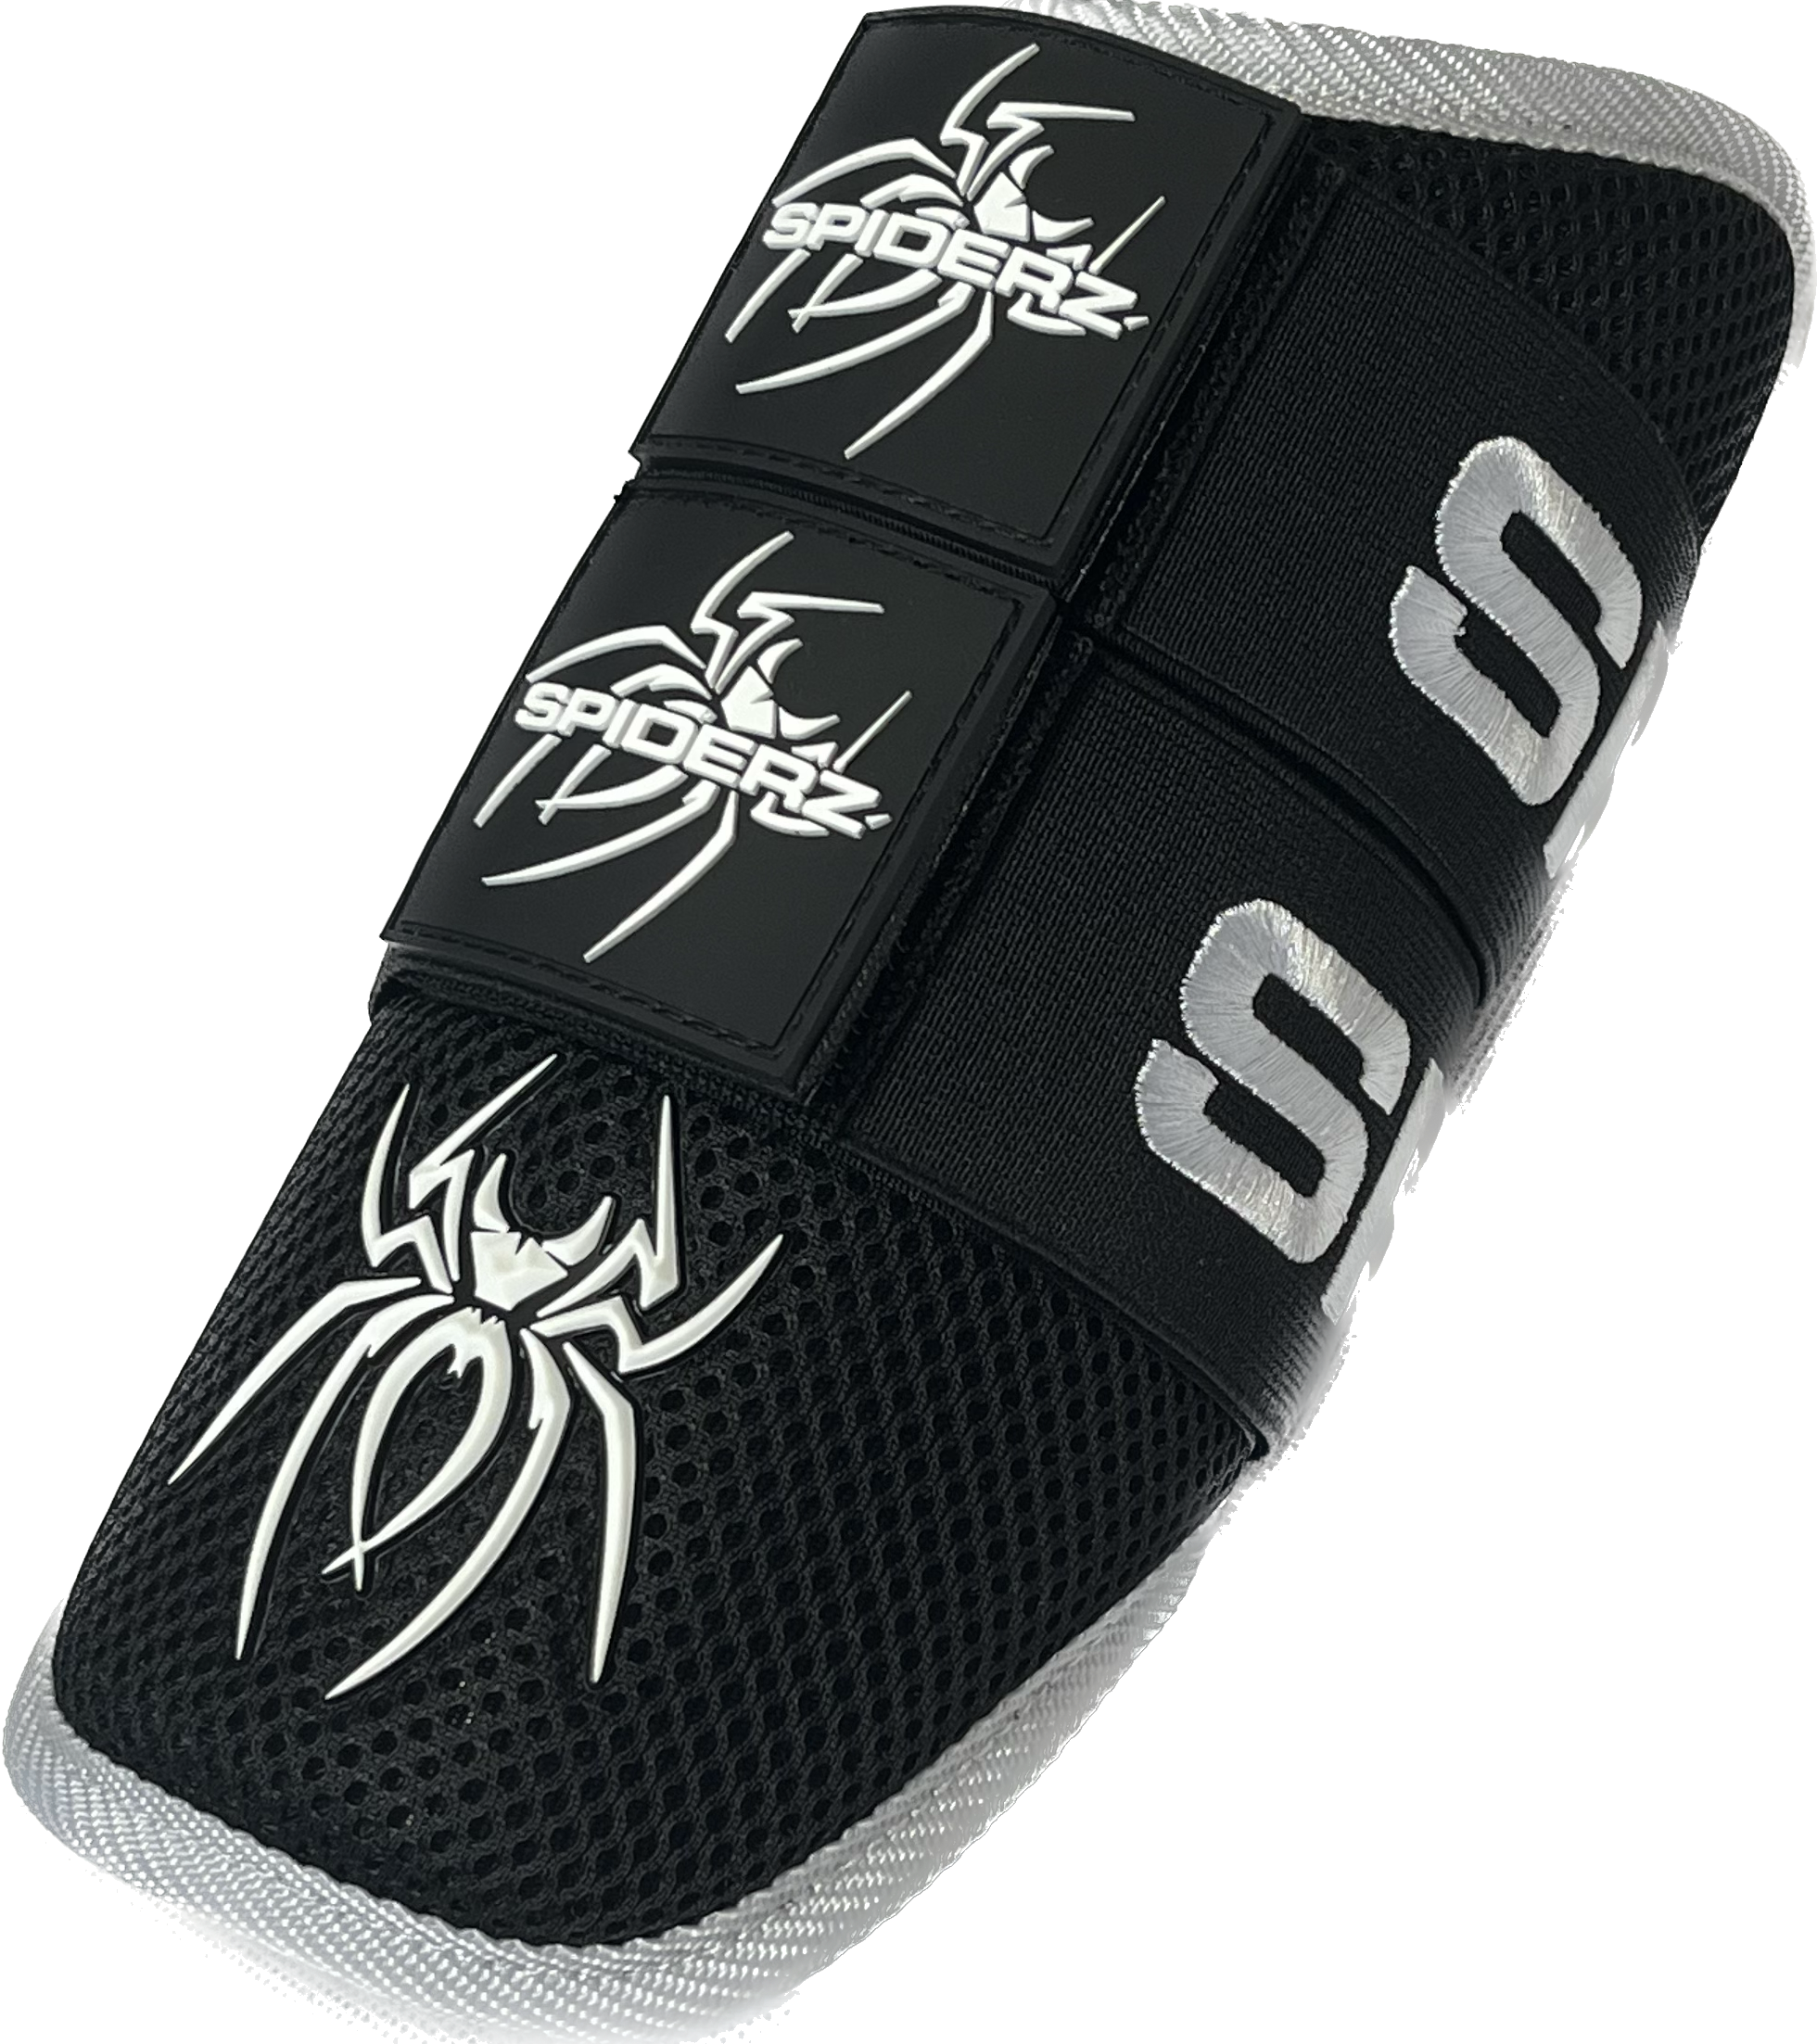 Spiderz Elbow Guard (11 color options)